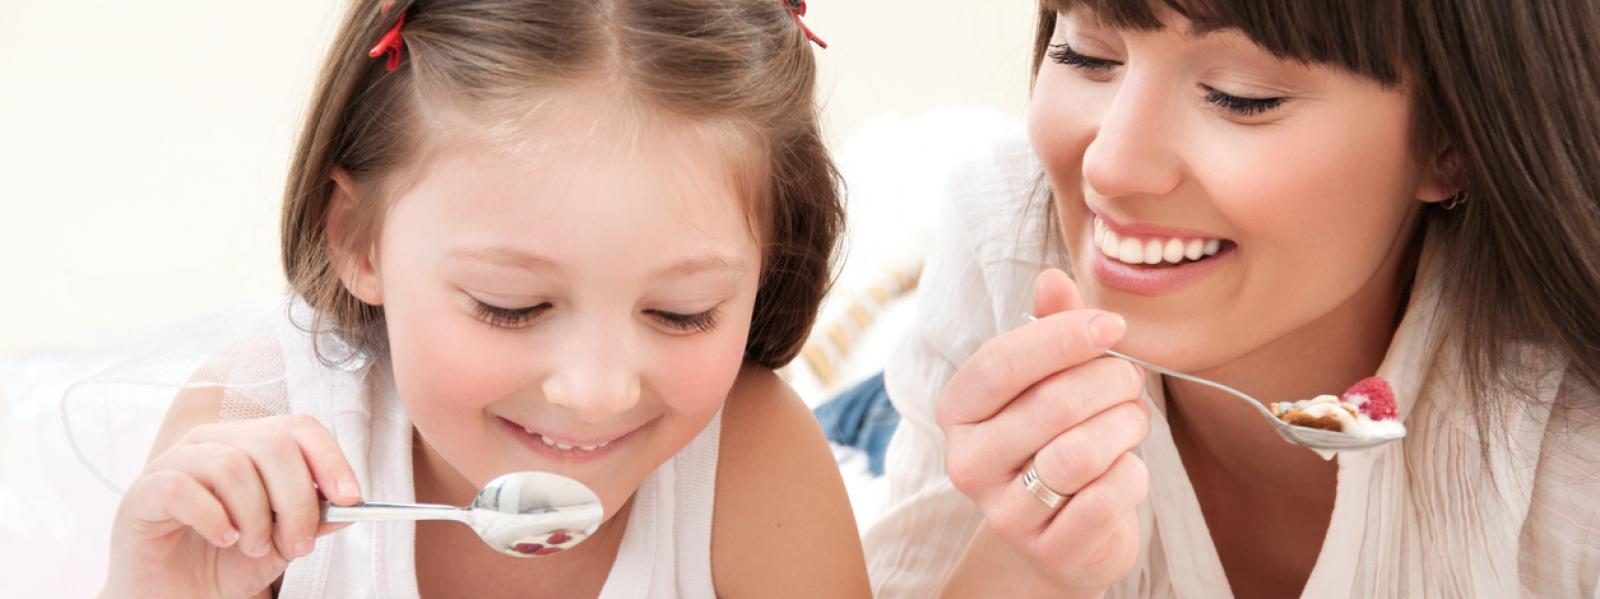 Static image of a mother and daughter smiling and eating yoghurt. 